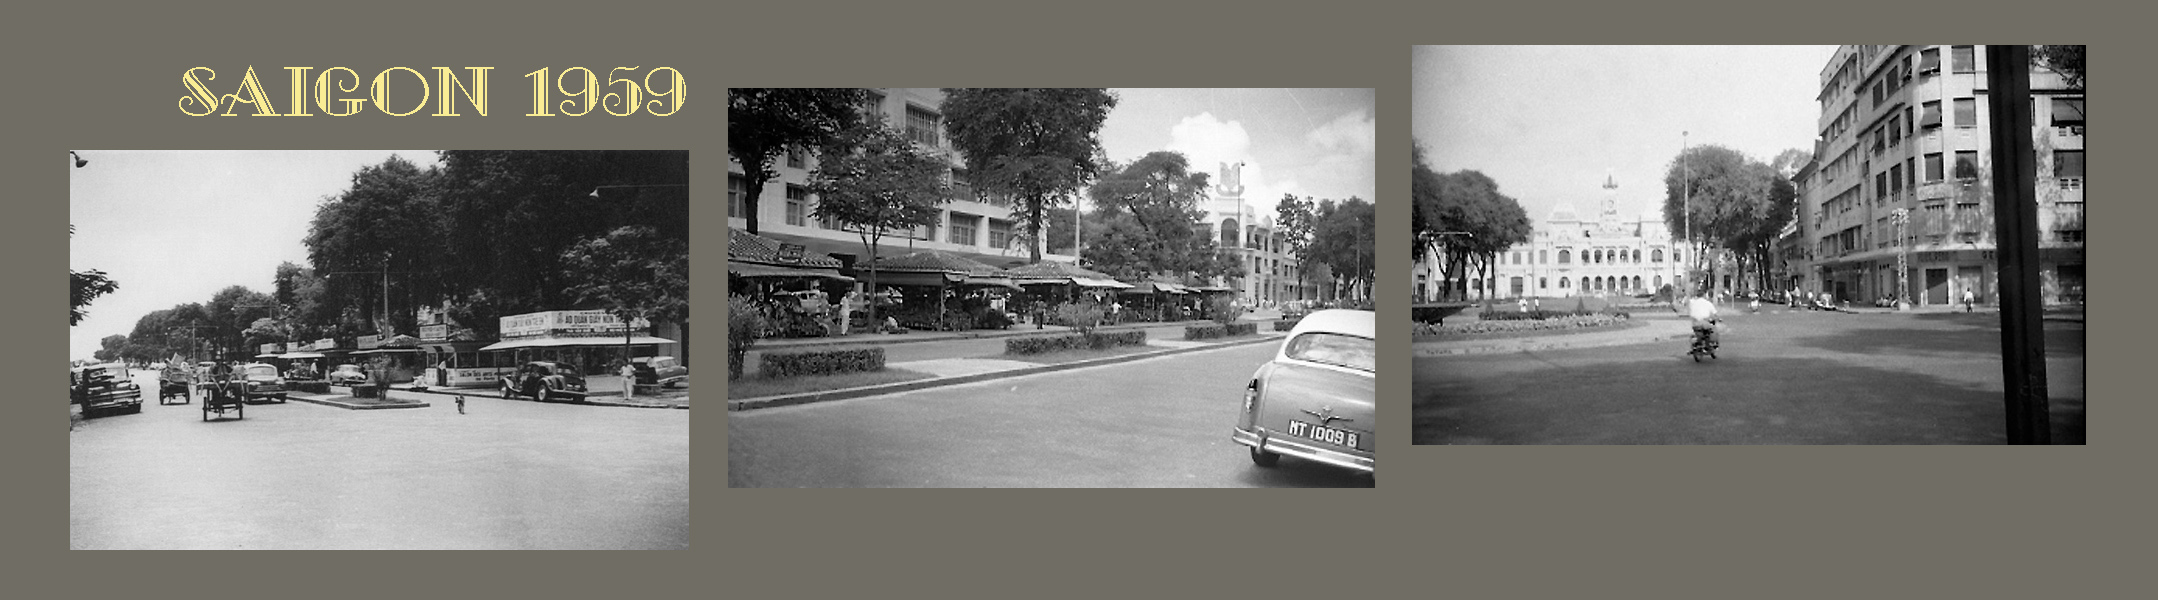 black and white image of a city with cars